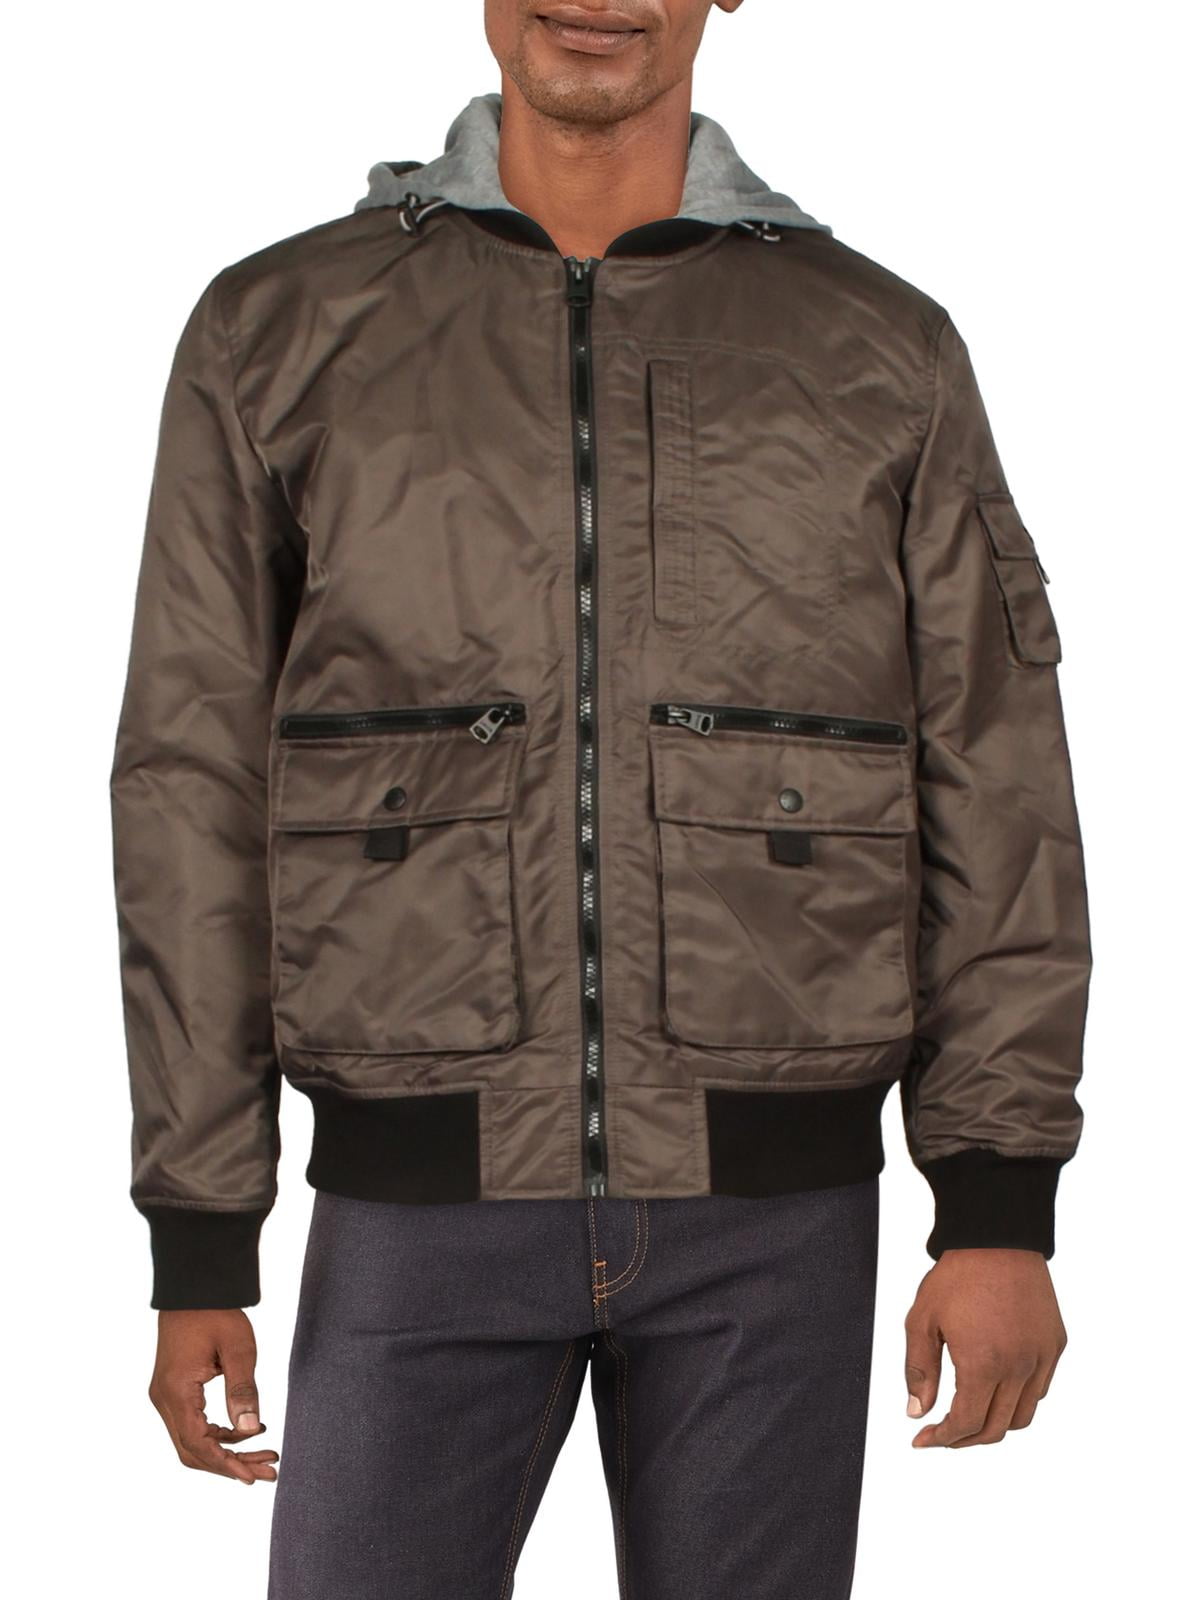 Levi Strauss & Co. Mens Hooded Cold Weather Utility Jacket - Walmart.com